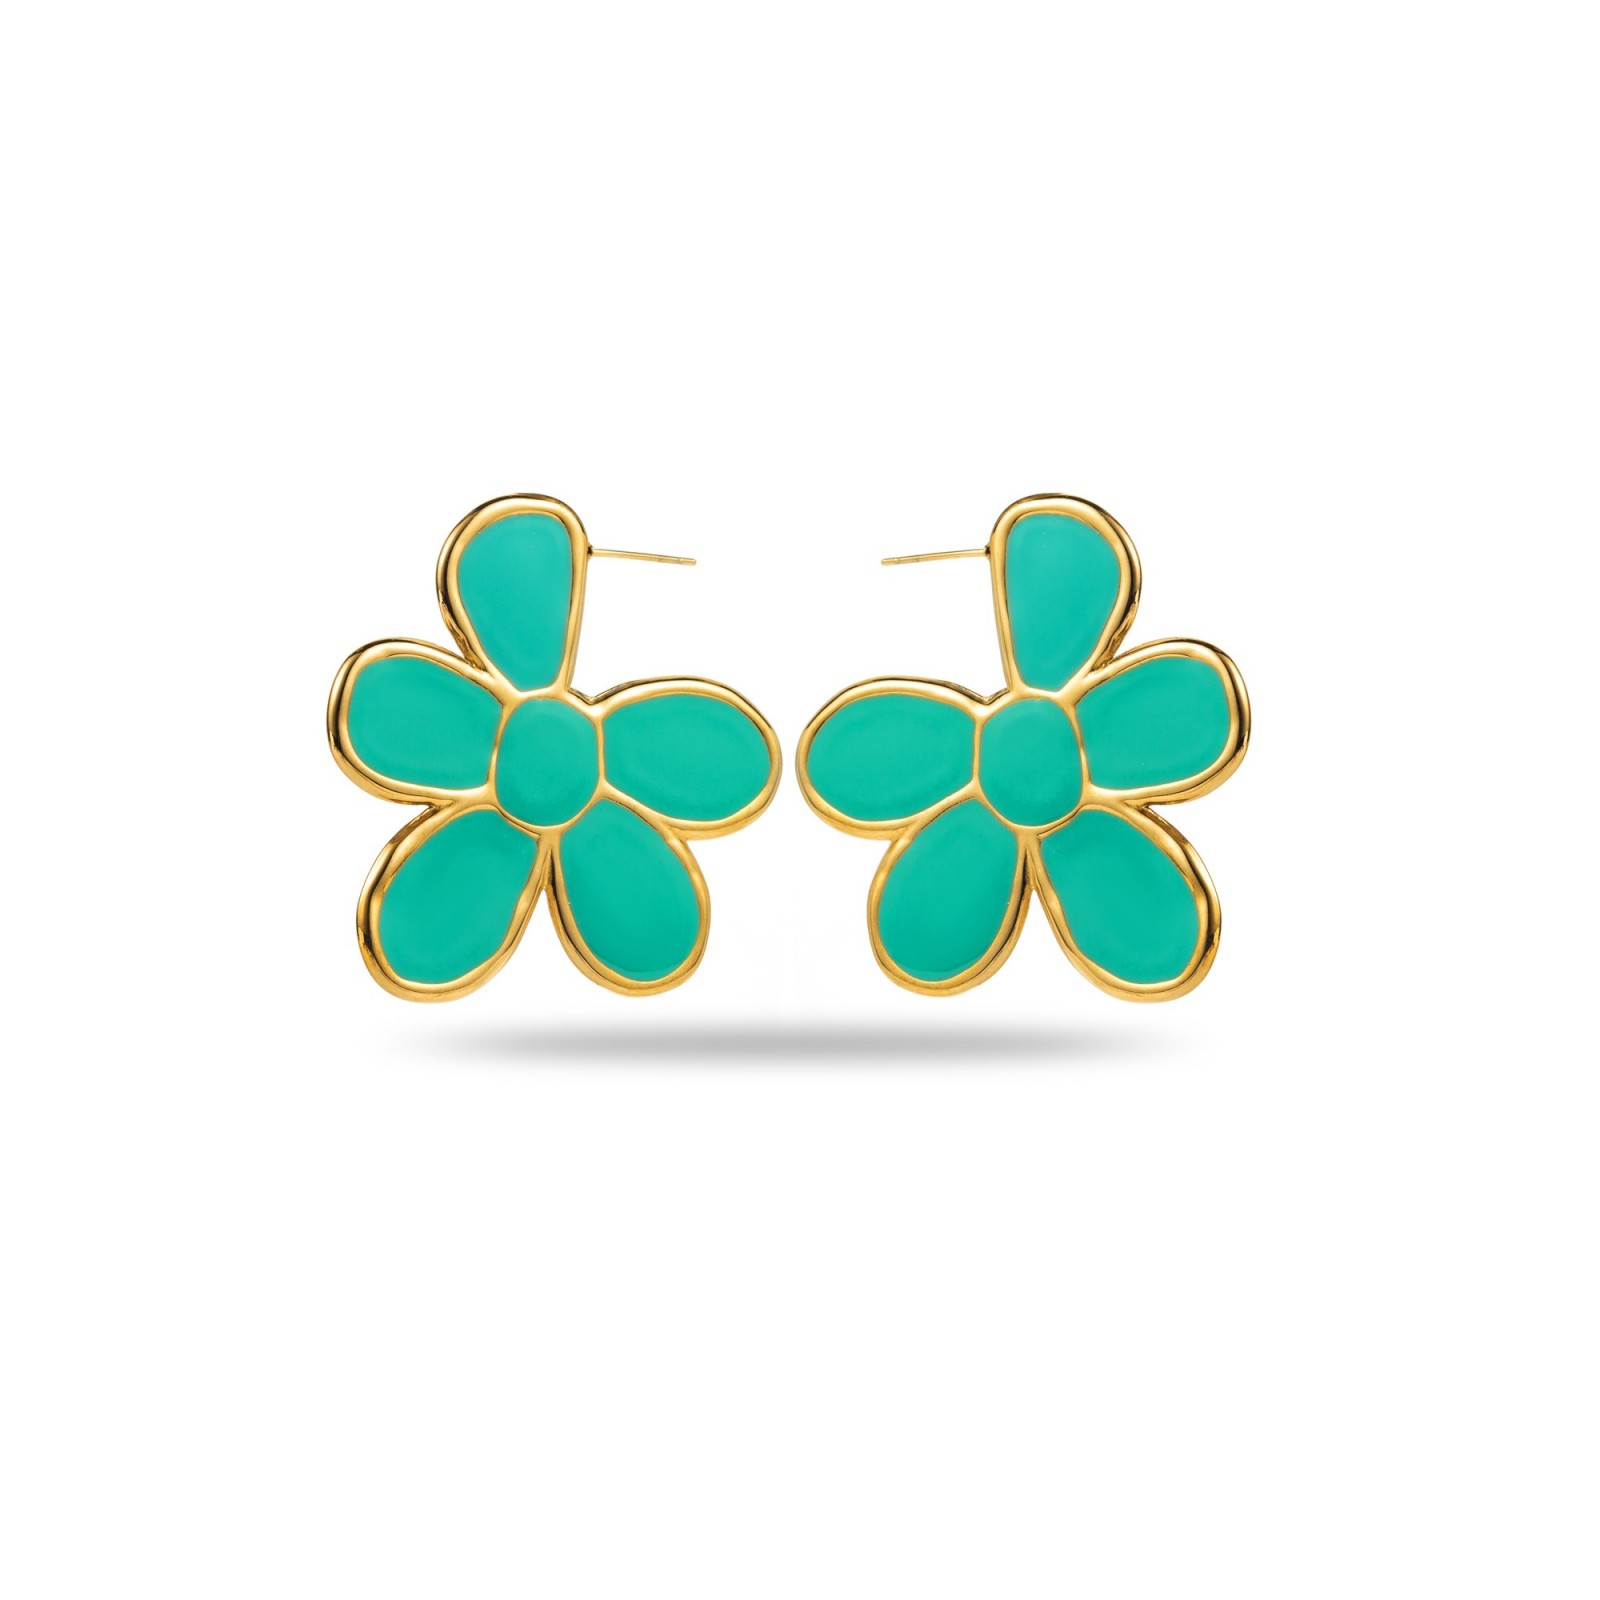 Colored Playful Flower Earrings Color:Turquoise Blue